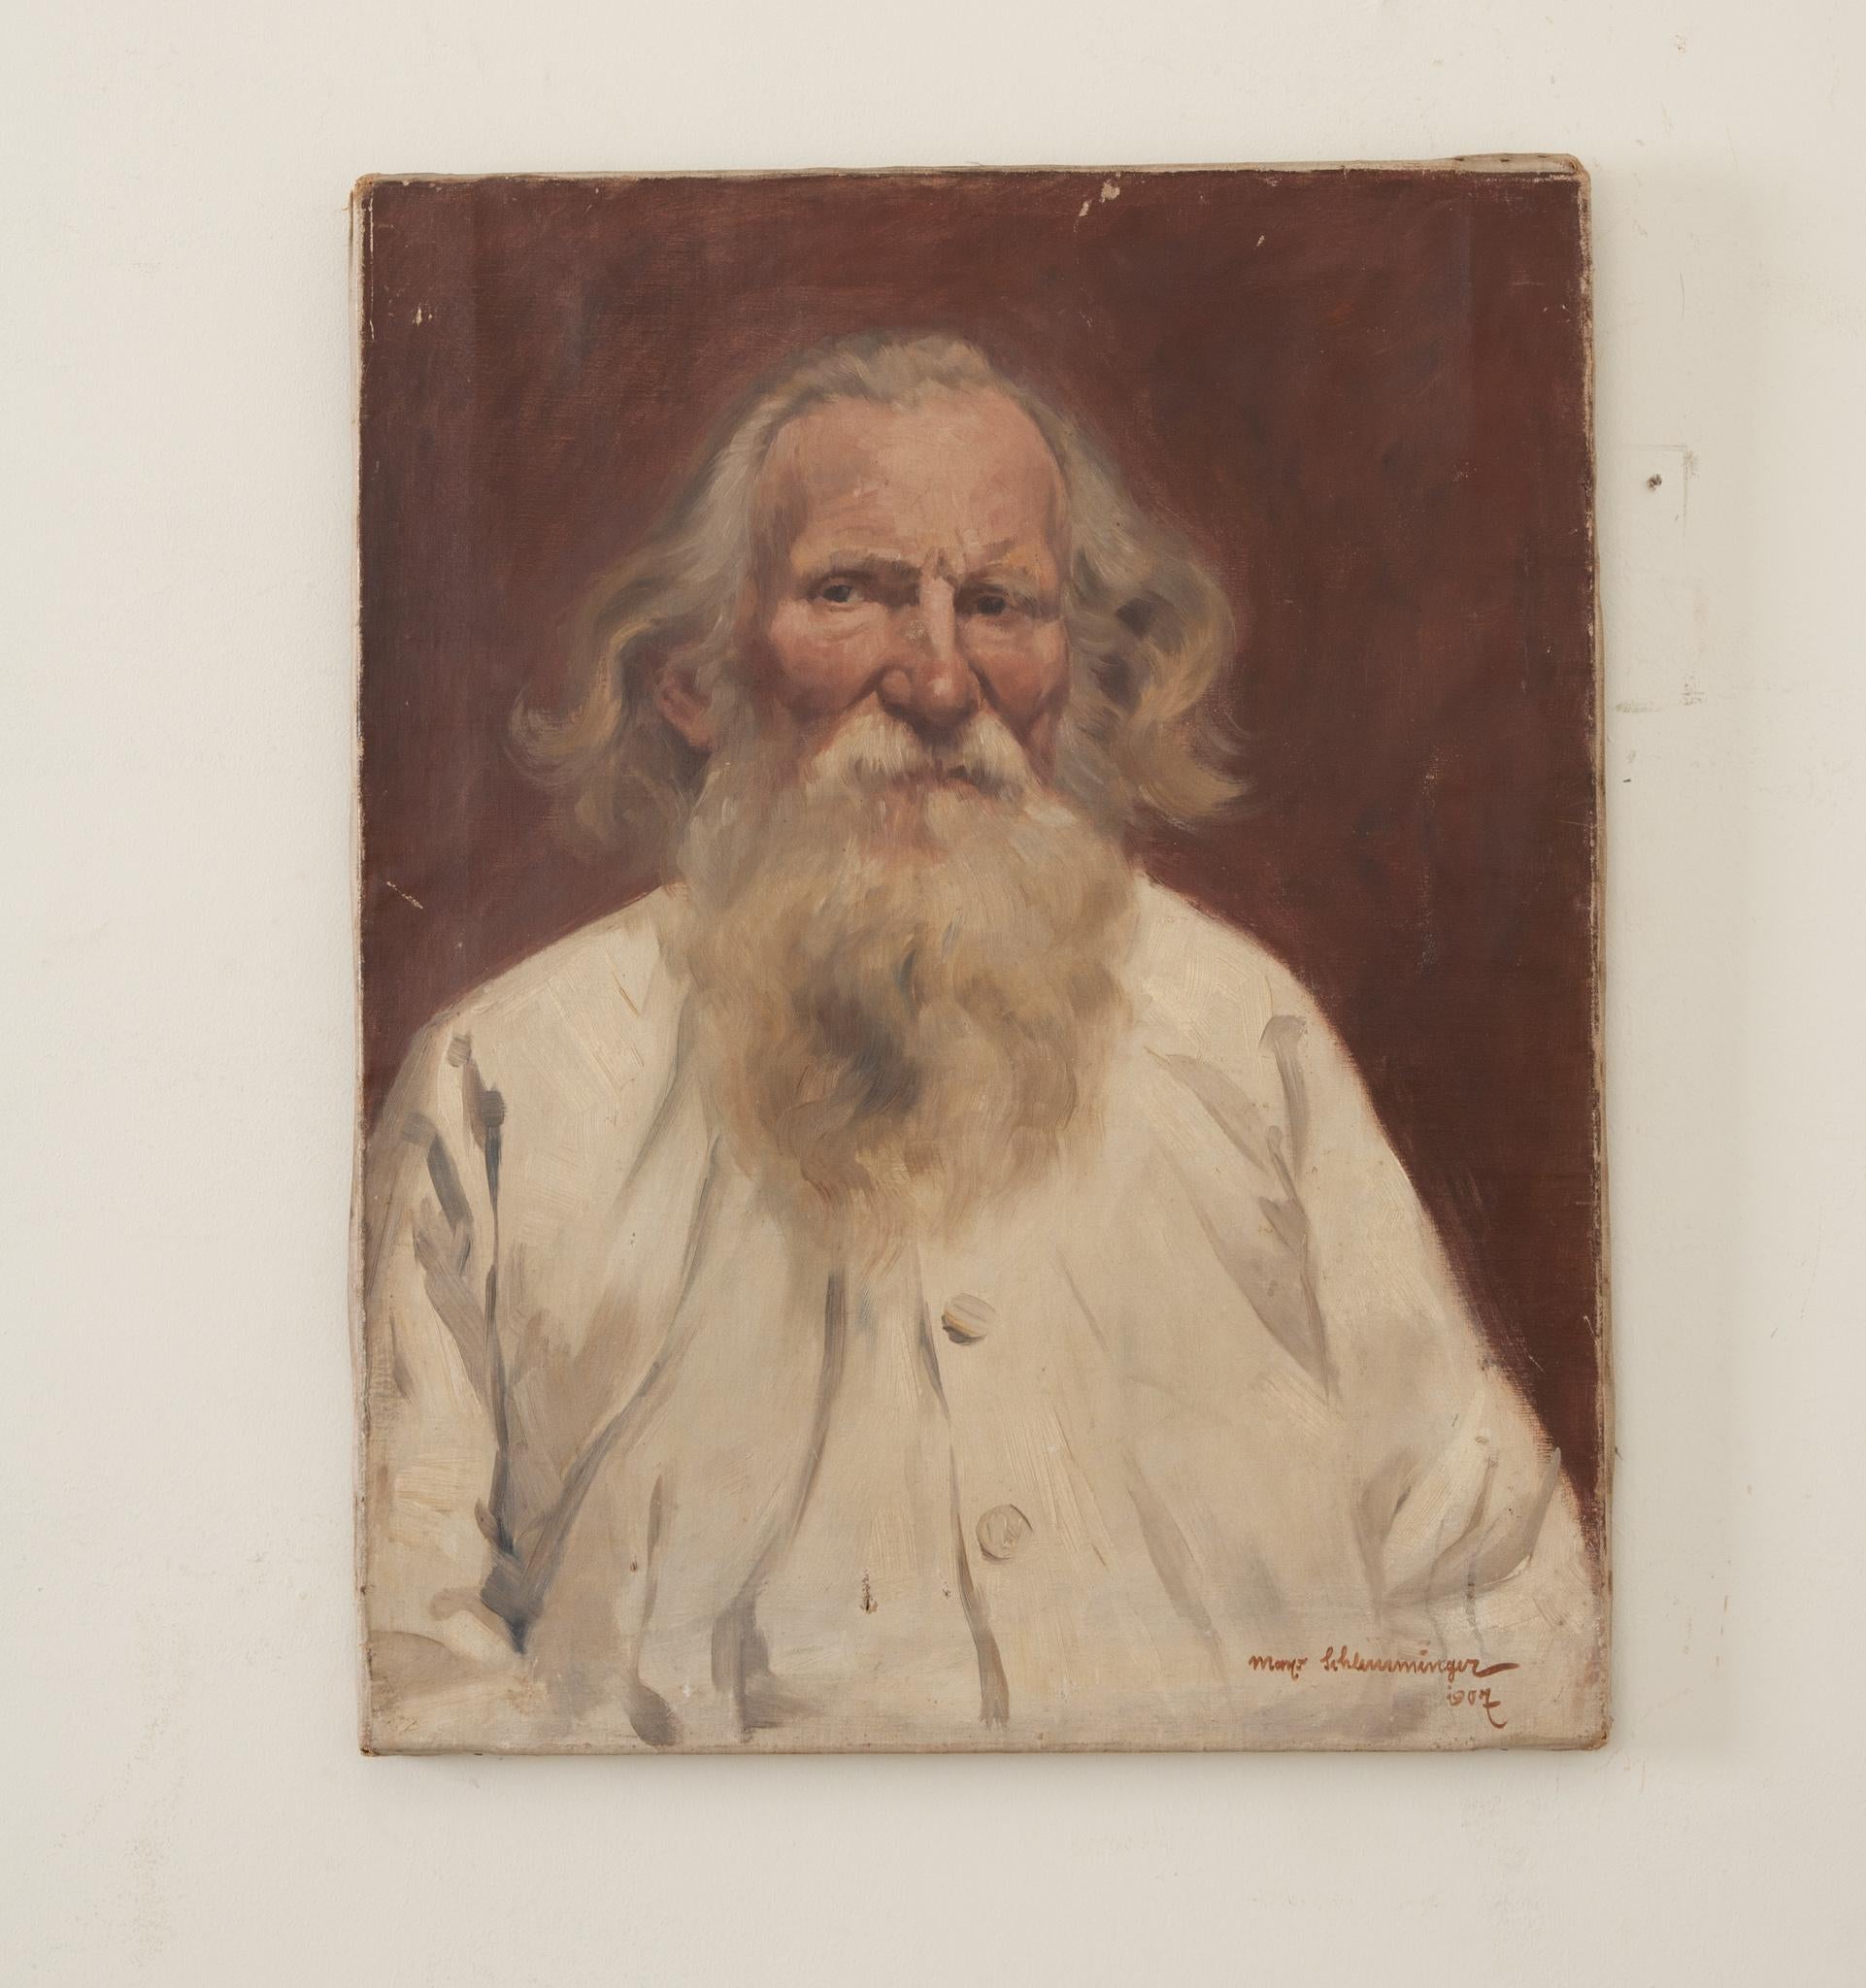 A wonderful original oil on canvas portrait of a man by painter Max Schlemminger, signed by the artist and dated 1907. Max Schlemminger was an artist born in Germany in 1880 and passed away in 1960 at the age of 80. His paintings have been sold at